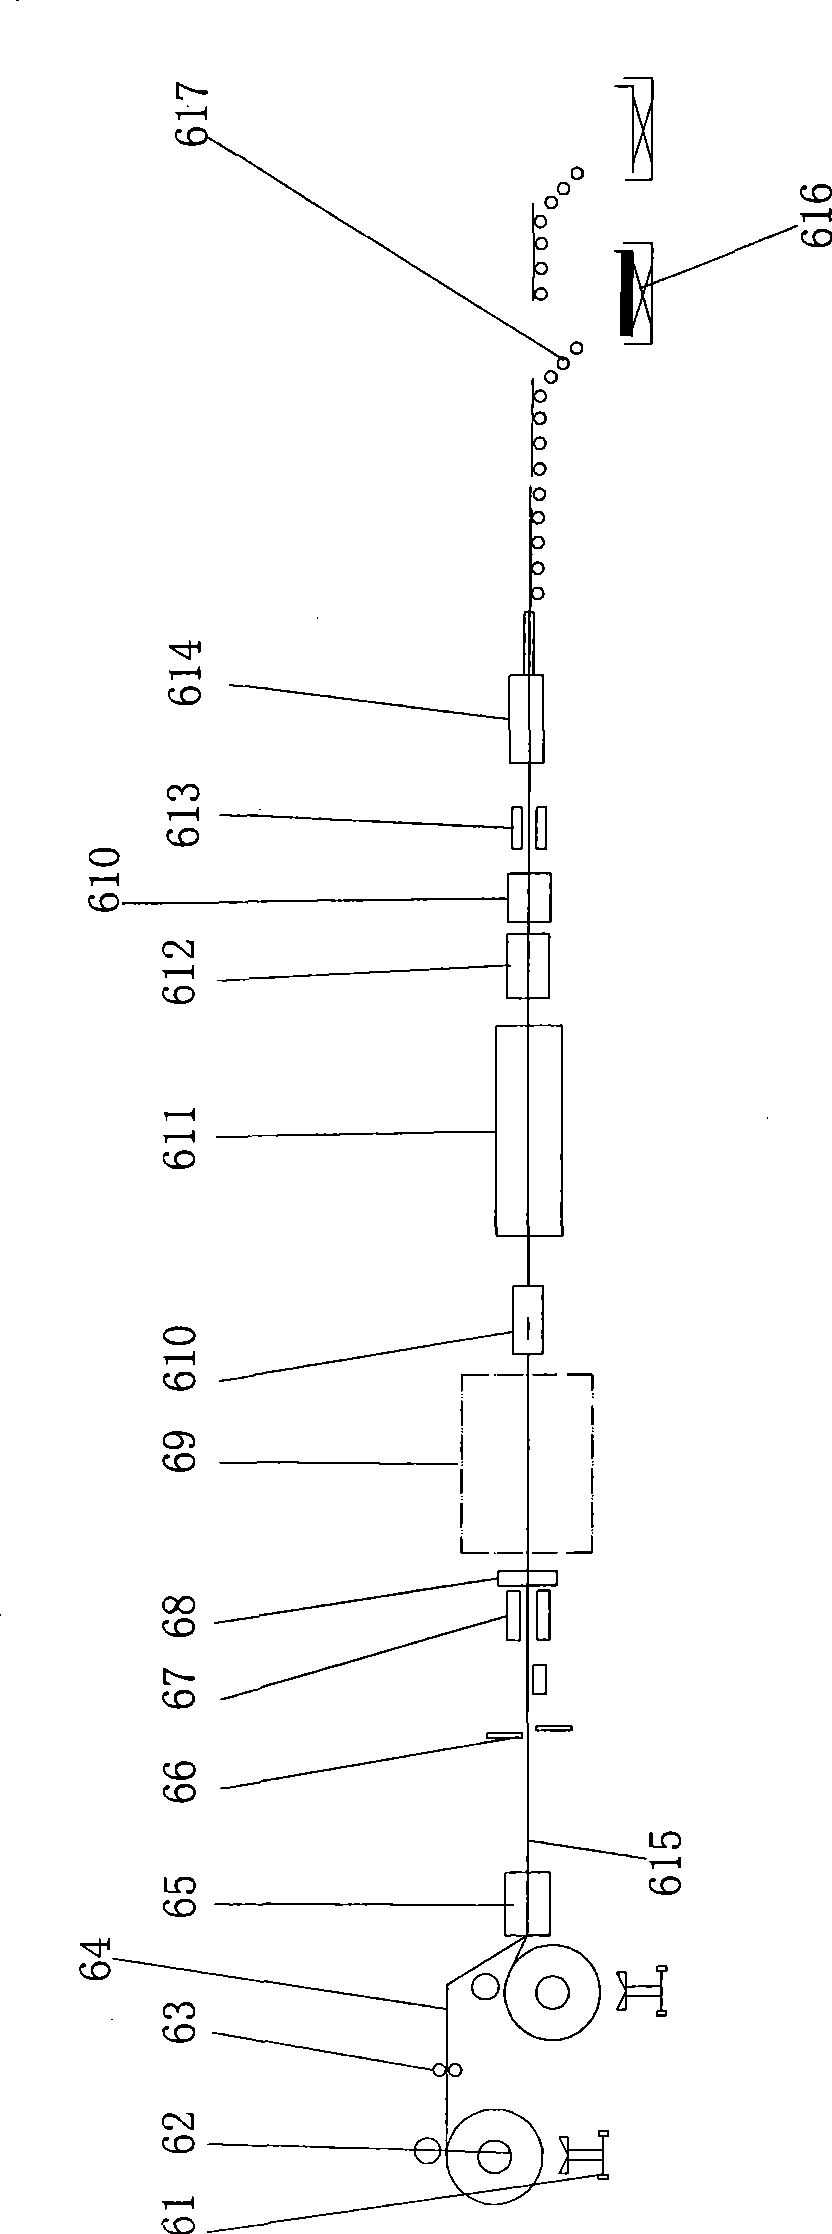 Method for processing bottom cross beam or bottom side beam of container and system for producing the same